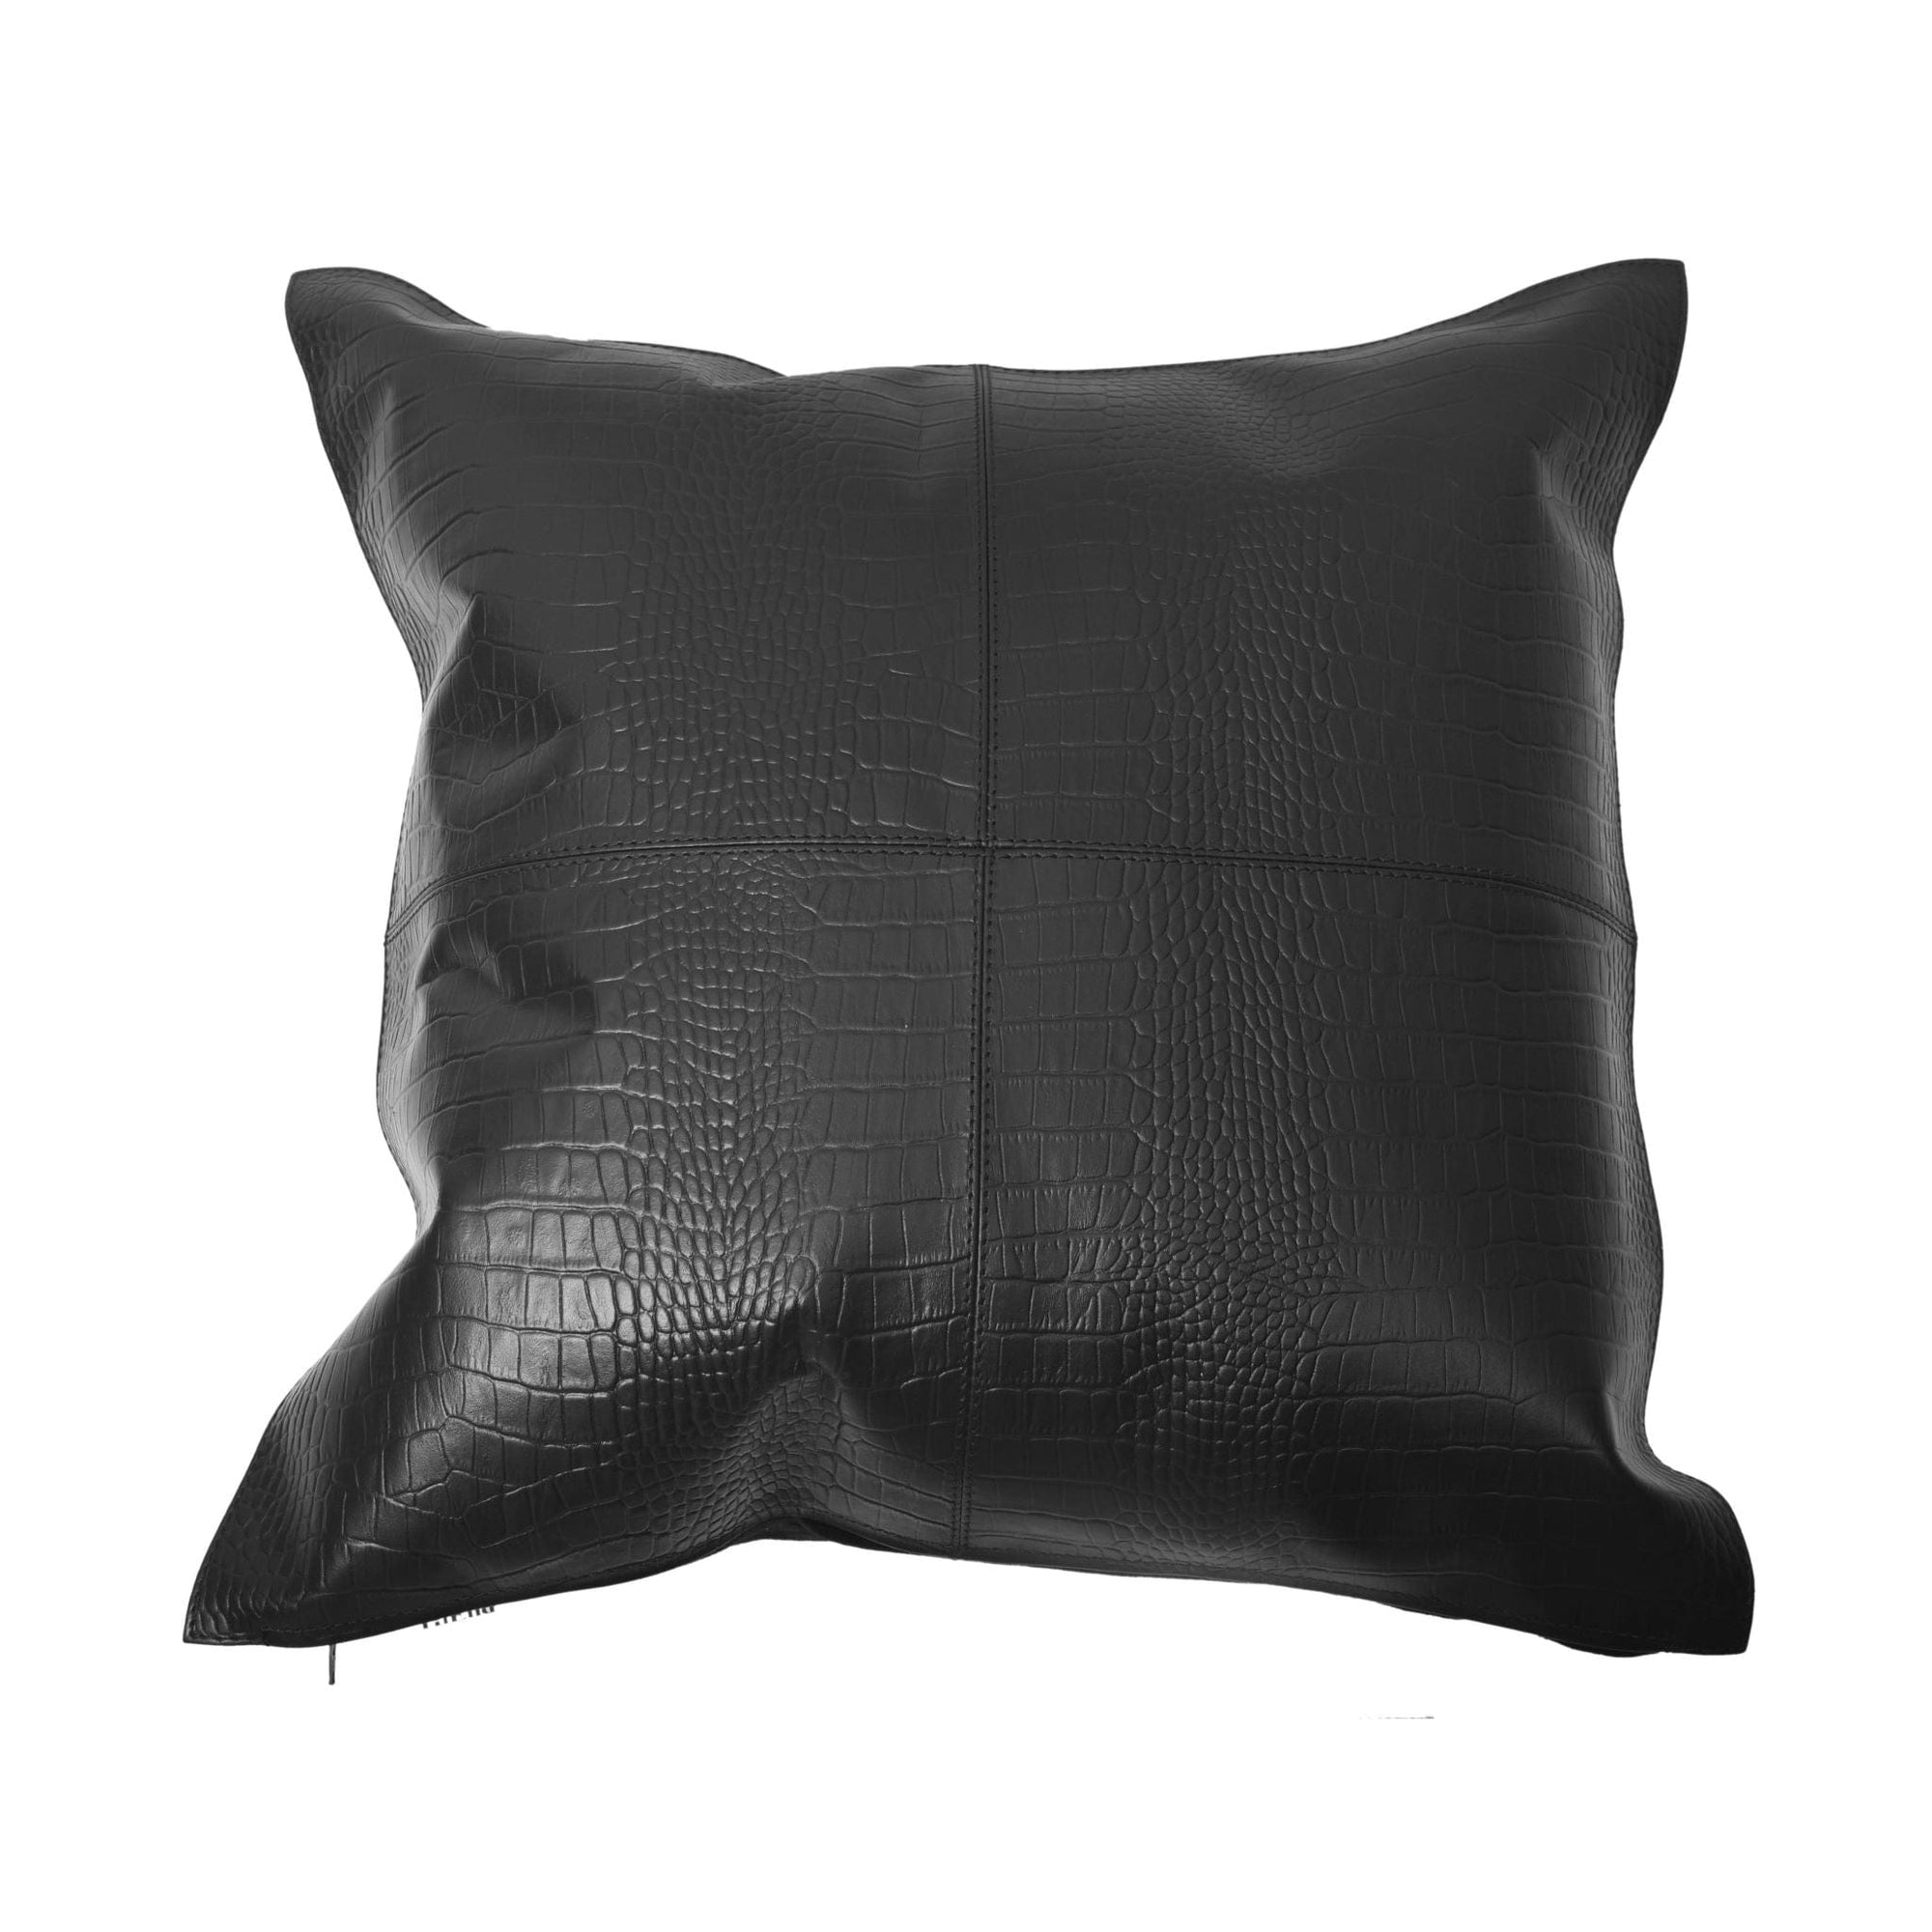 Genuine Leather Embossed Croc Pillow Black Leather Pillow